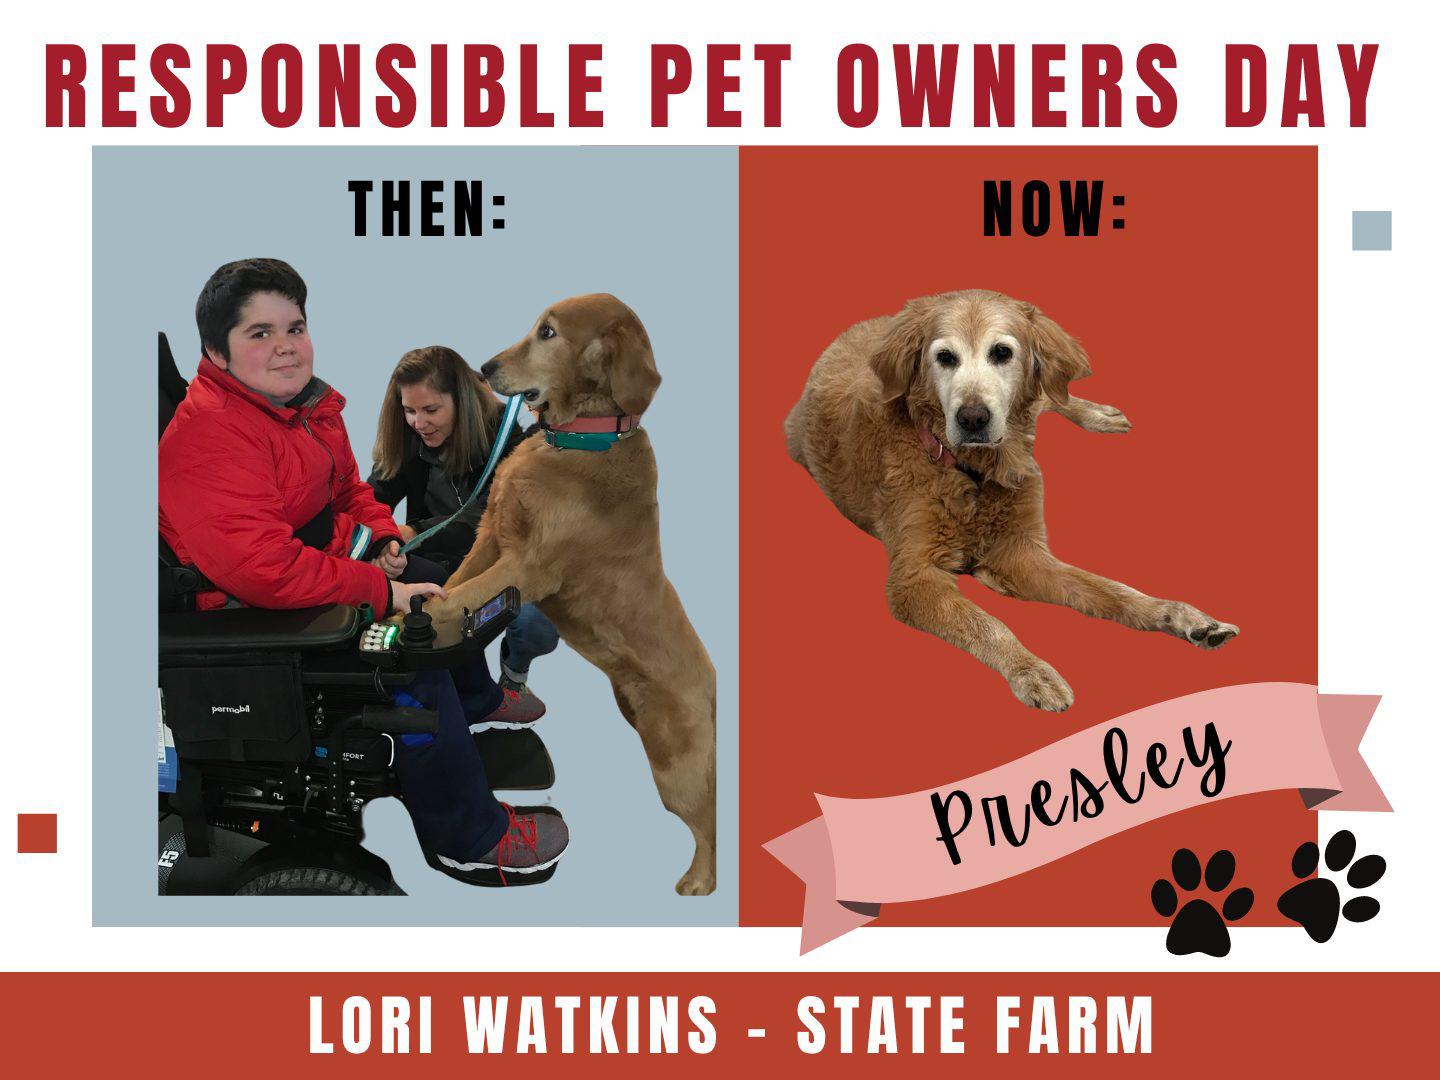 Lori Watkins State Farm celebrates National Responsible Pet Owner's Day by honoring companions like Presley, our beloved Goldendoodle, who dutifully served as a loyal support to my son and is now enjoying a well-deserved retirement.

As we cherish our furry friends, let's pledge to be responsible pet owners by ensuring their health and safety, starting with securing the right pet insurance coverage. Call our office today to obtain a free pet insurance quote and give them the care they deserve.